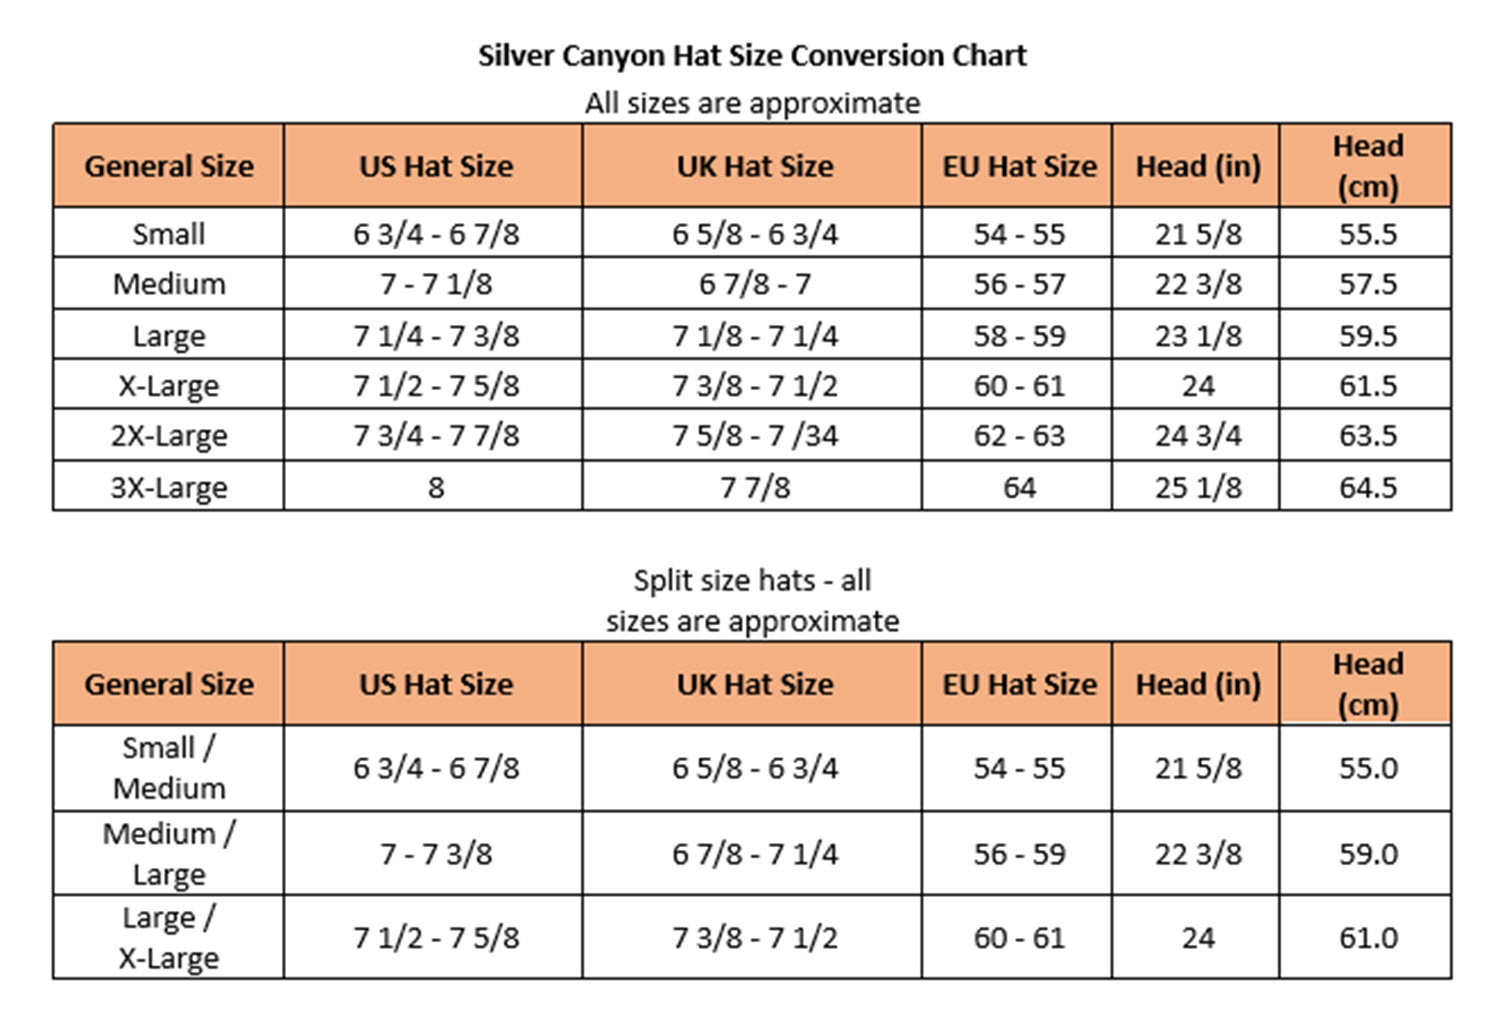 Silver Canyon Hat Fit and Size Chart – Silver Canyon